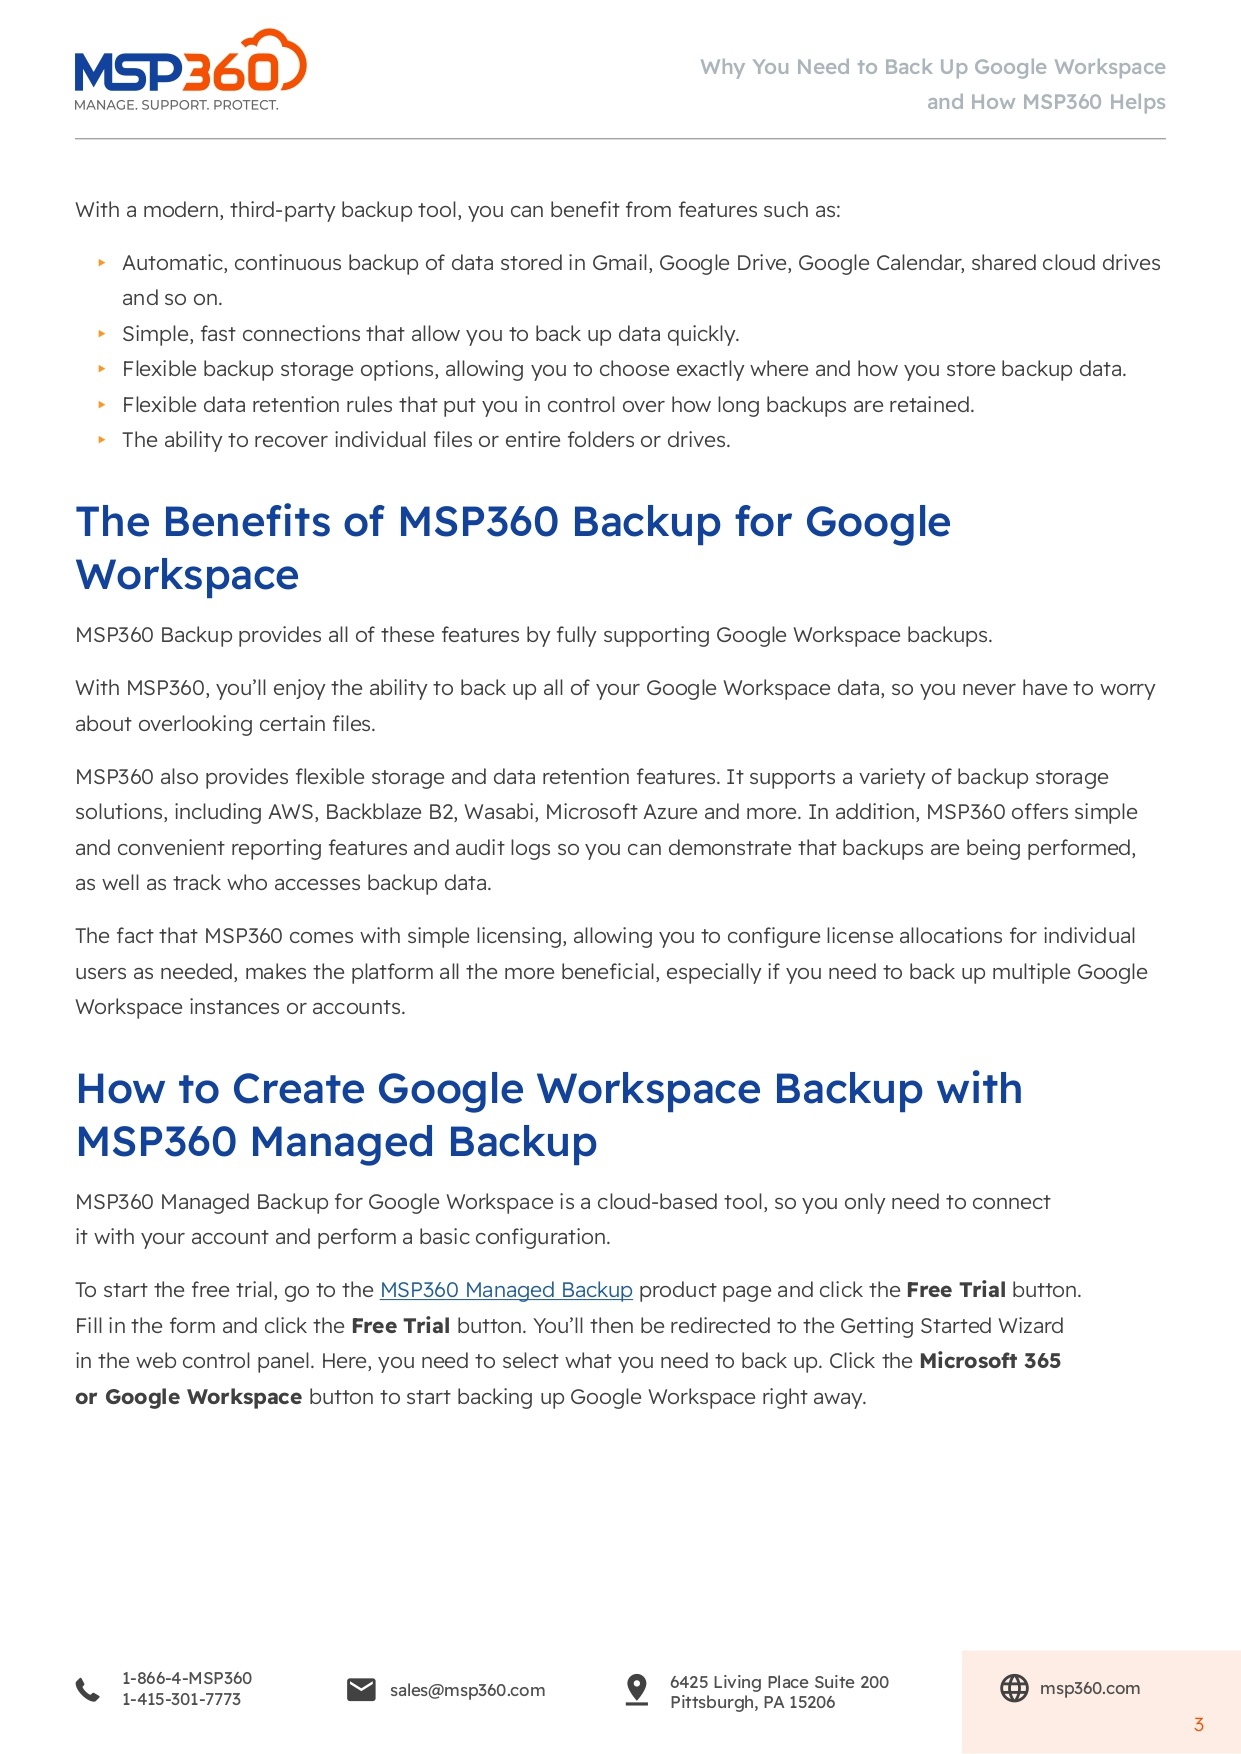 Why You Need to Back Up Google Workspace and How MSP360 Helps new_page-0003